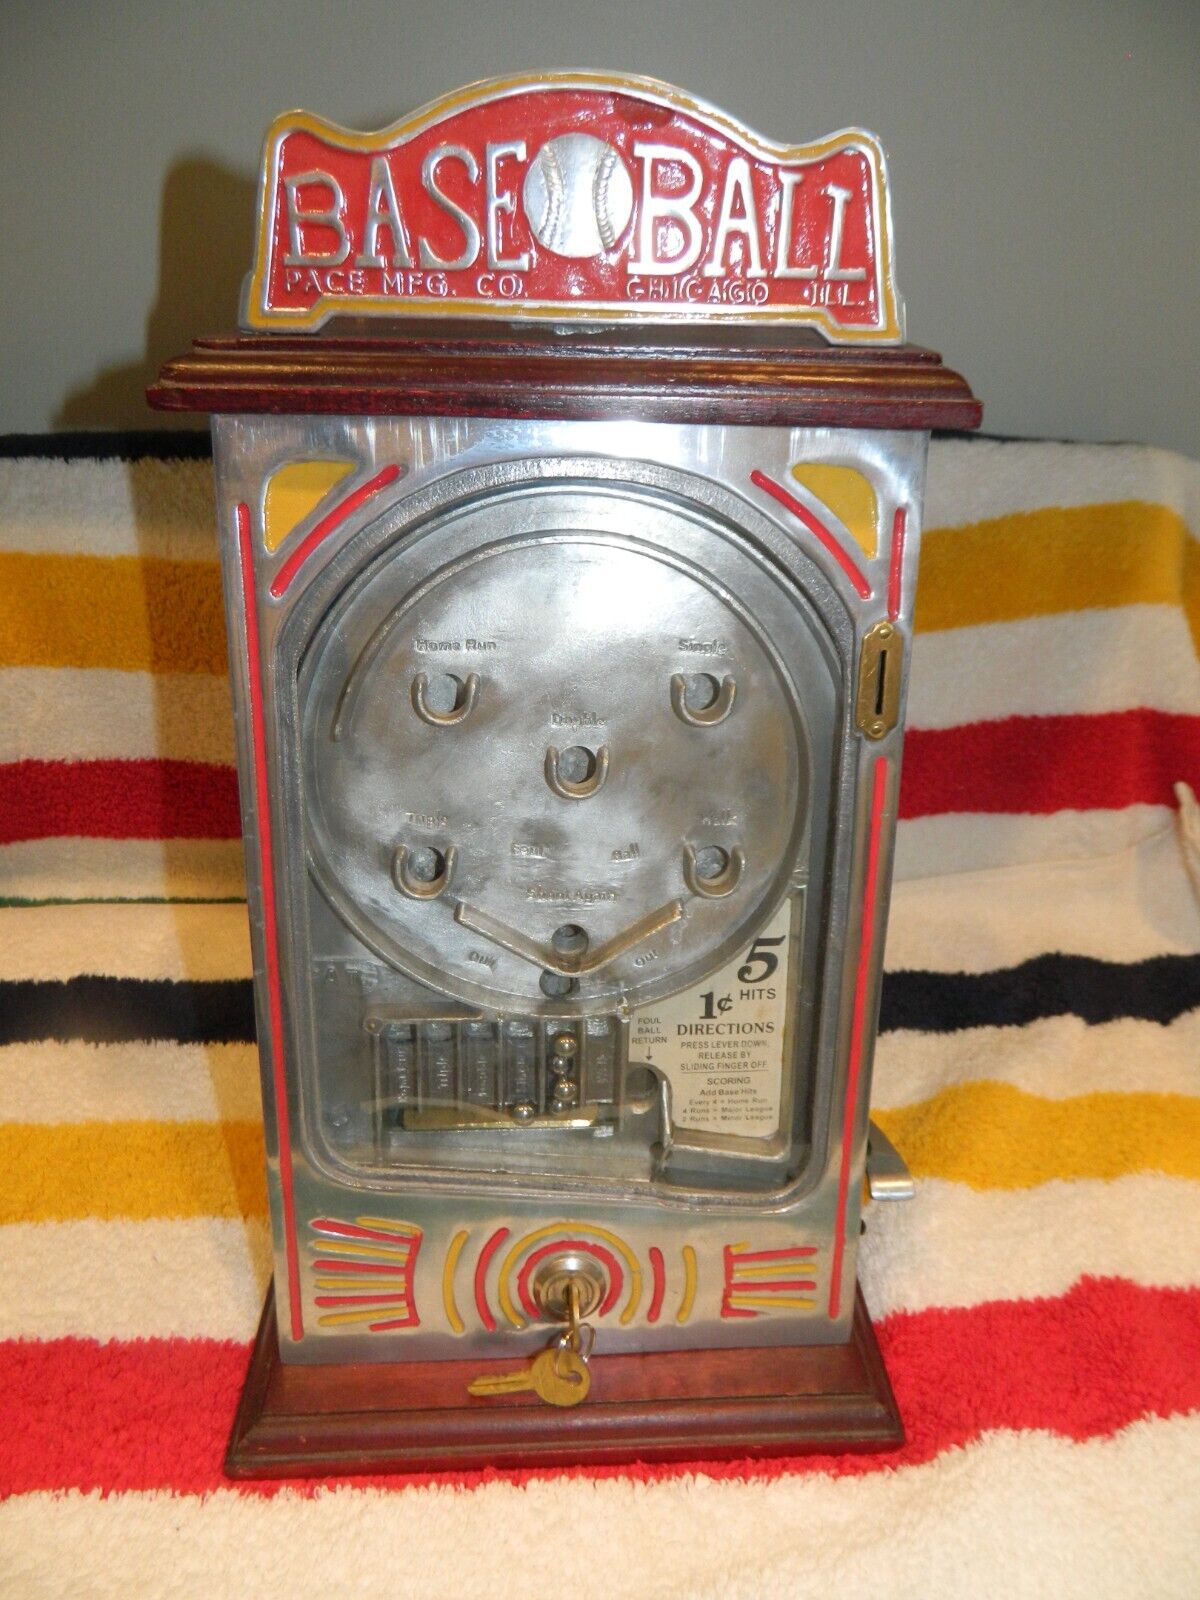 1 CENT COIN OPERATED PACE BASE BALL GAME.